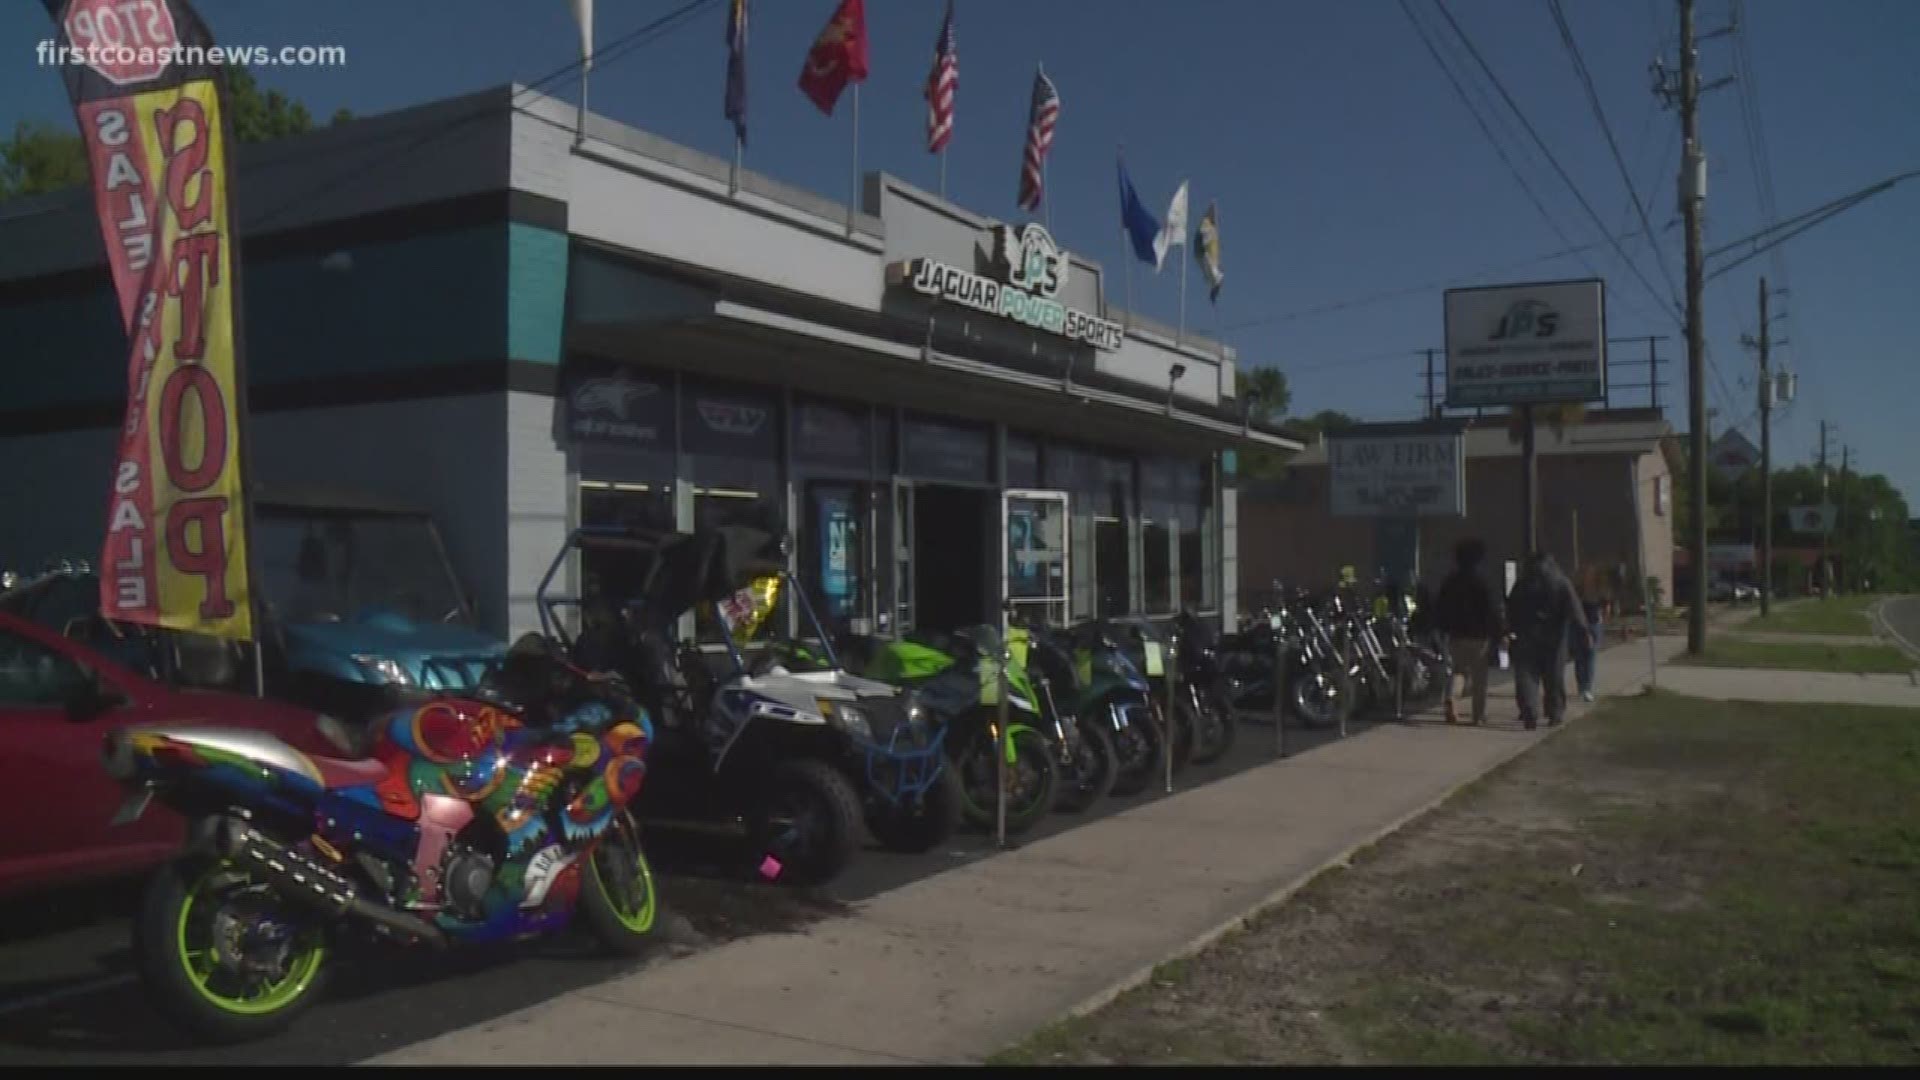 Mayor Lenny Curry sent a press release Tuesday afternoon stating he has ordered a review of the actions of a city employee after she issued a citation to Jaguar Power Sports.